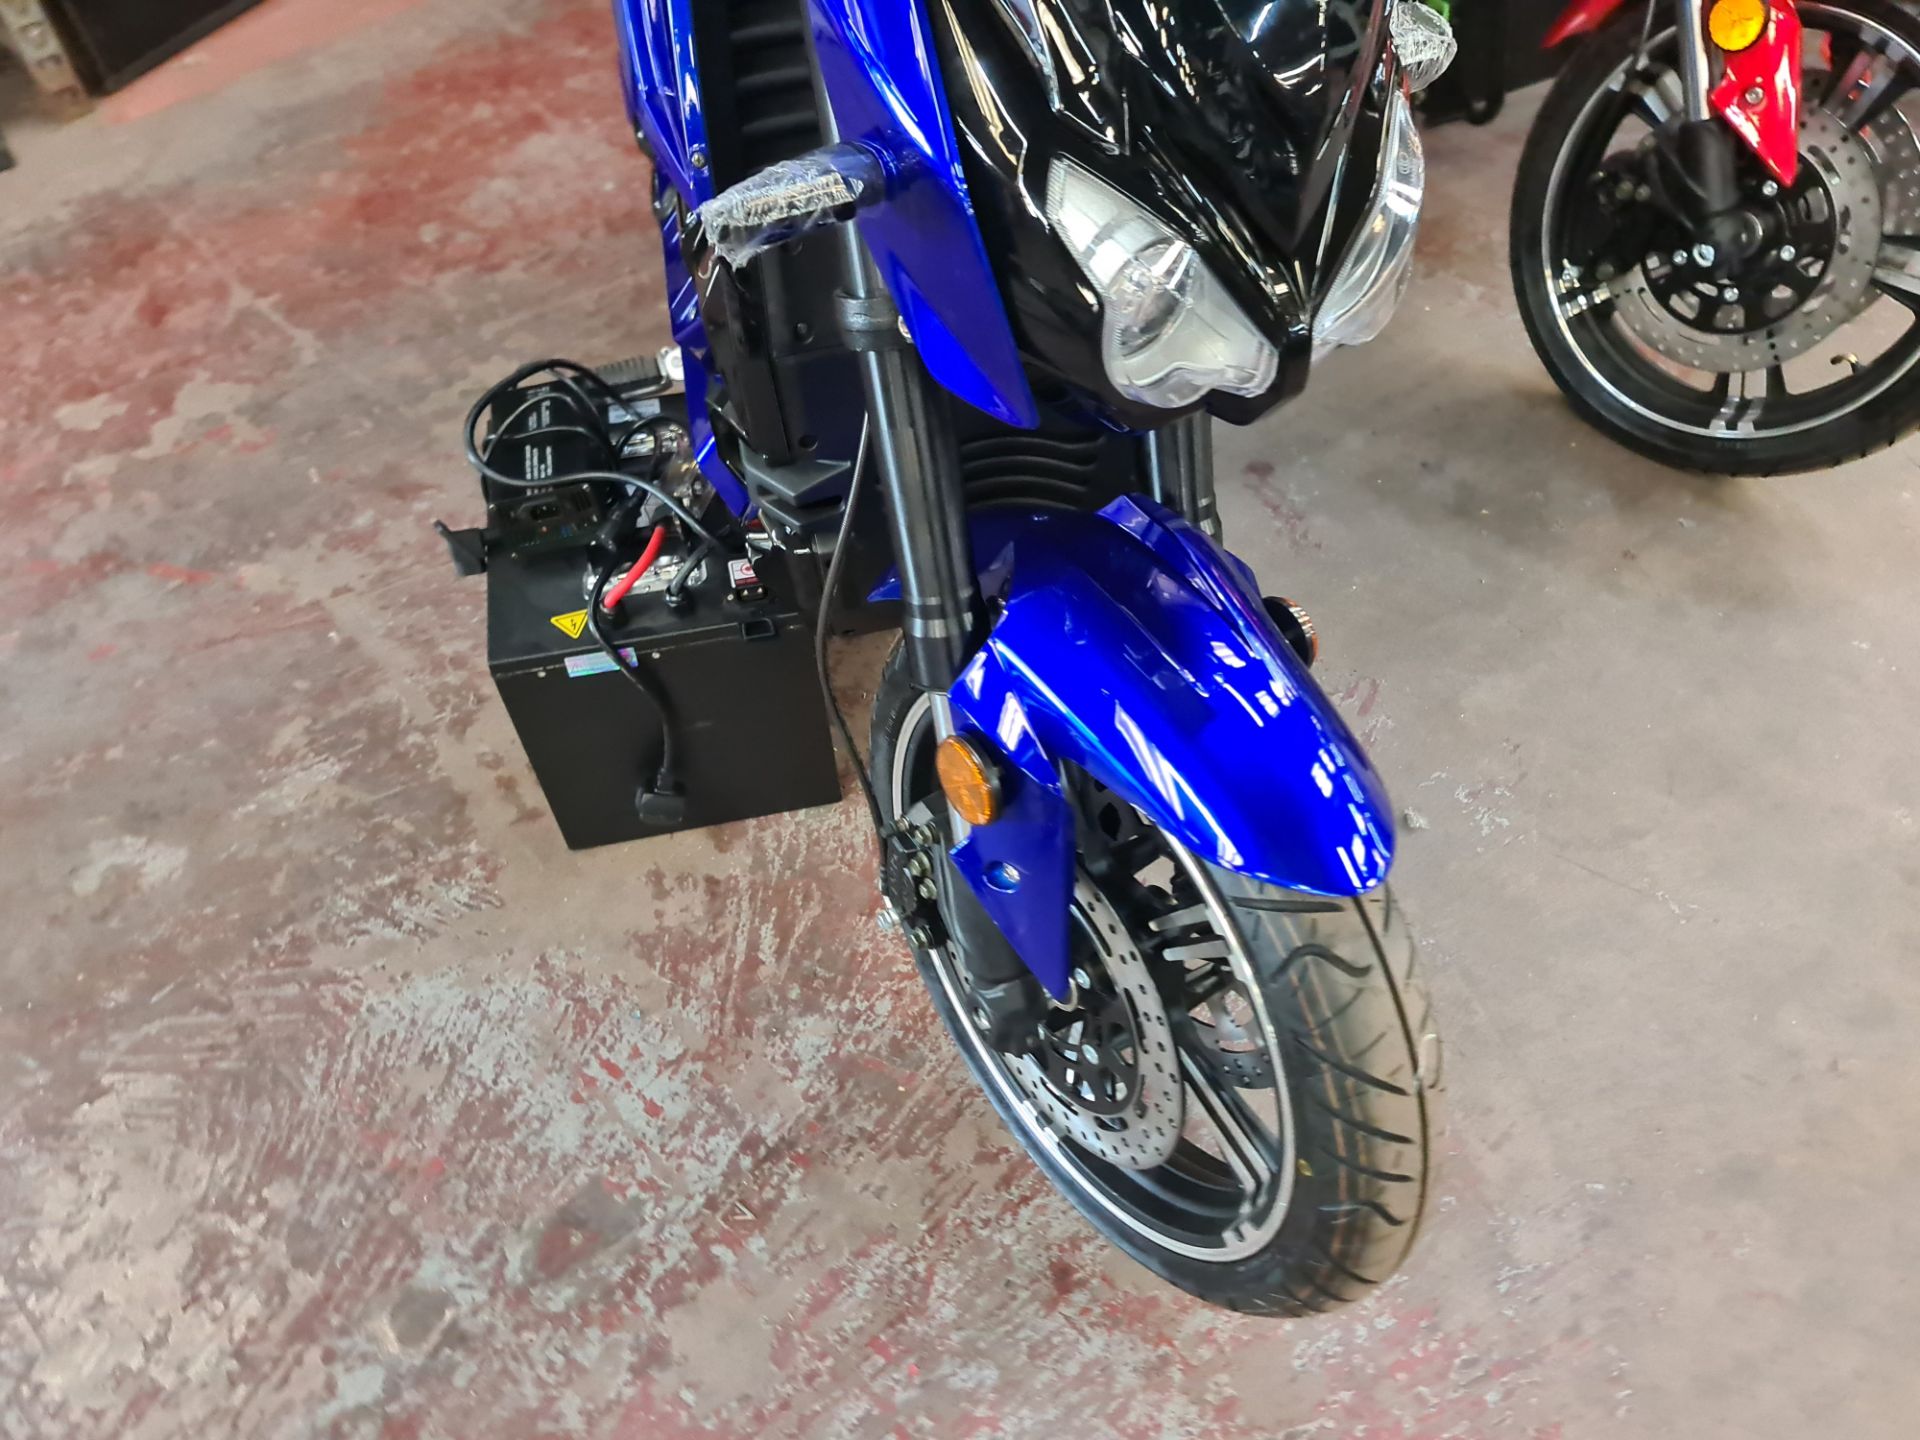 Farsta 6000 electric motorbike, Non-runner. Colour: blue, 125cc equivalent, 63mph top speed, 135 mil - Image 5 of 26